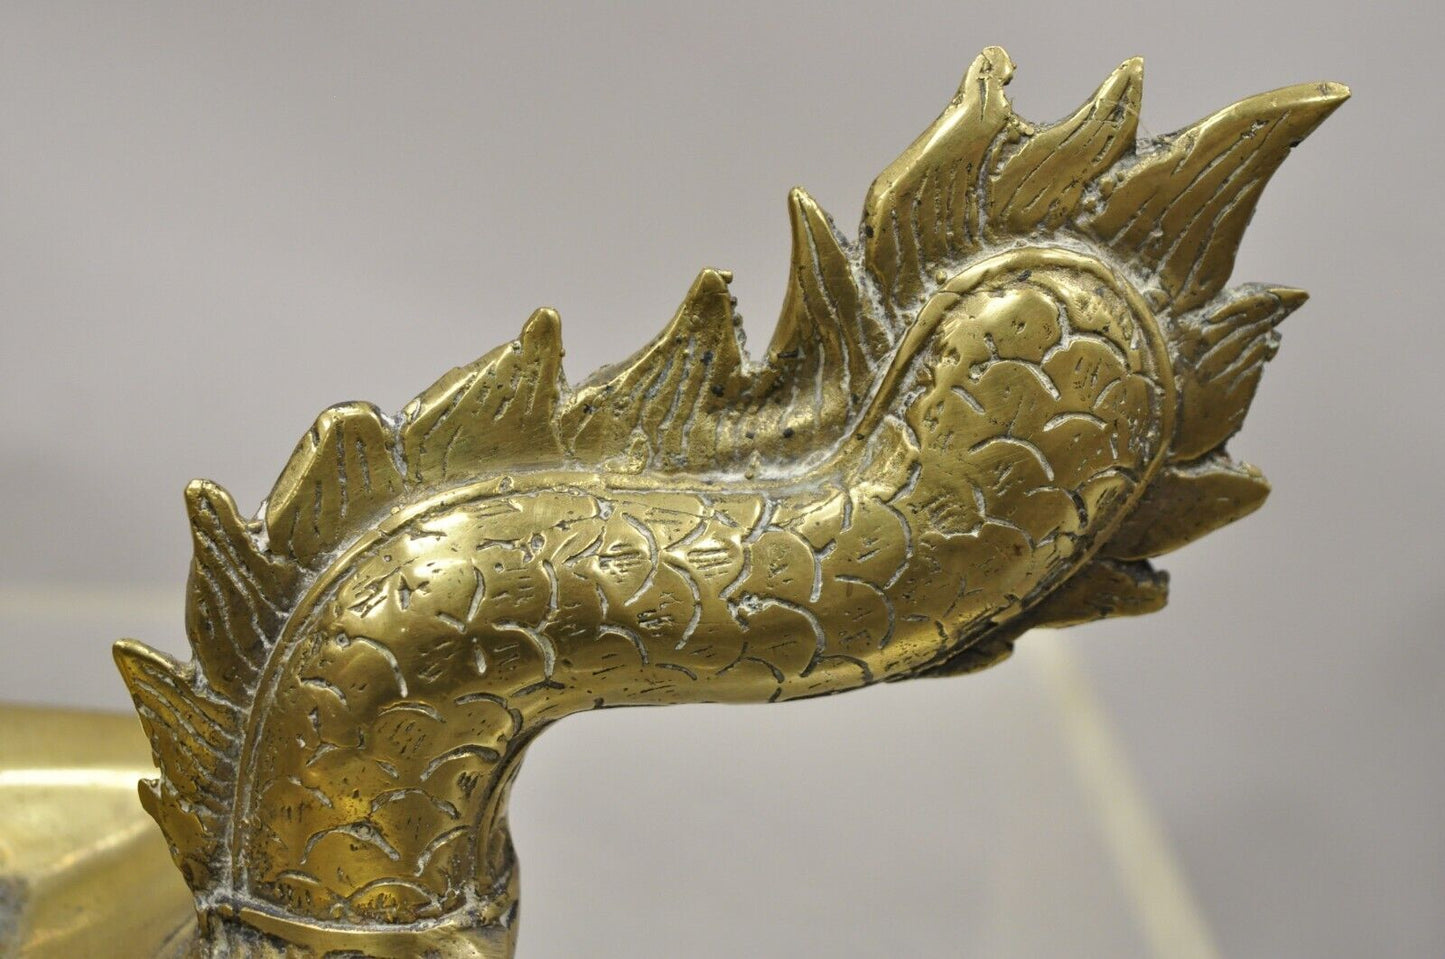 Vintage Solid Brass Dragon Form Chinese Trinket Dish Desk Accessory